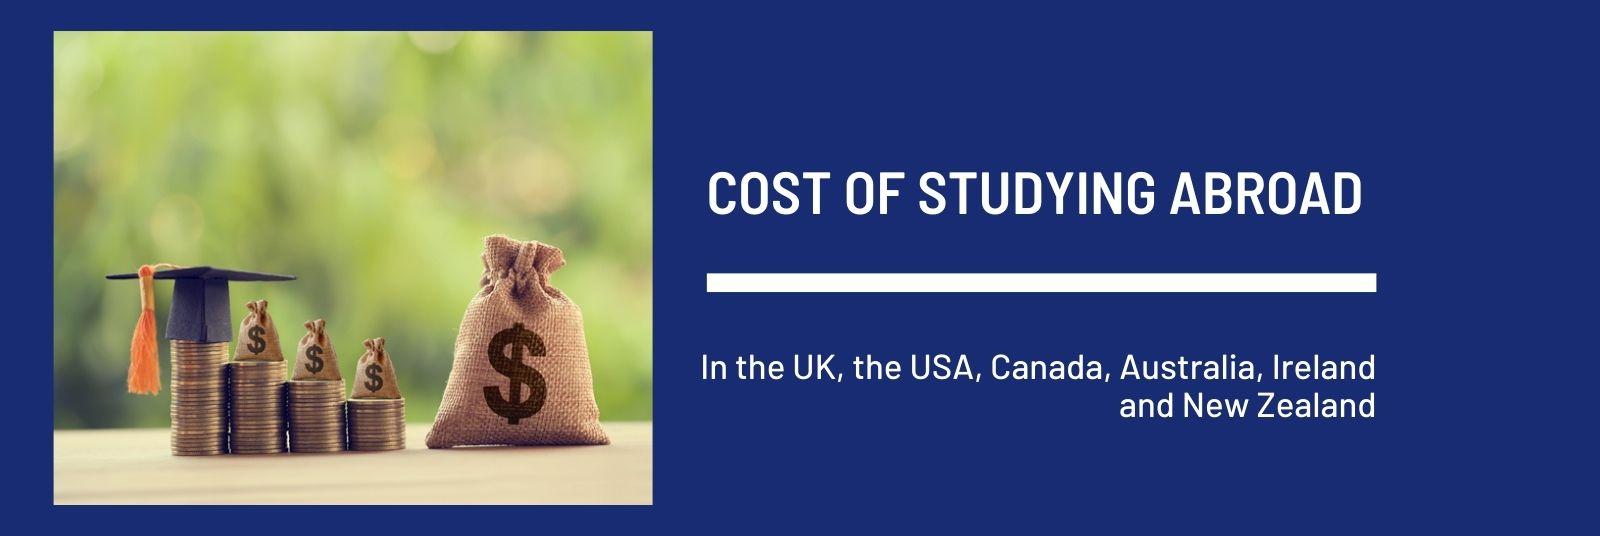 Cost of studying abroad for Indian students